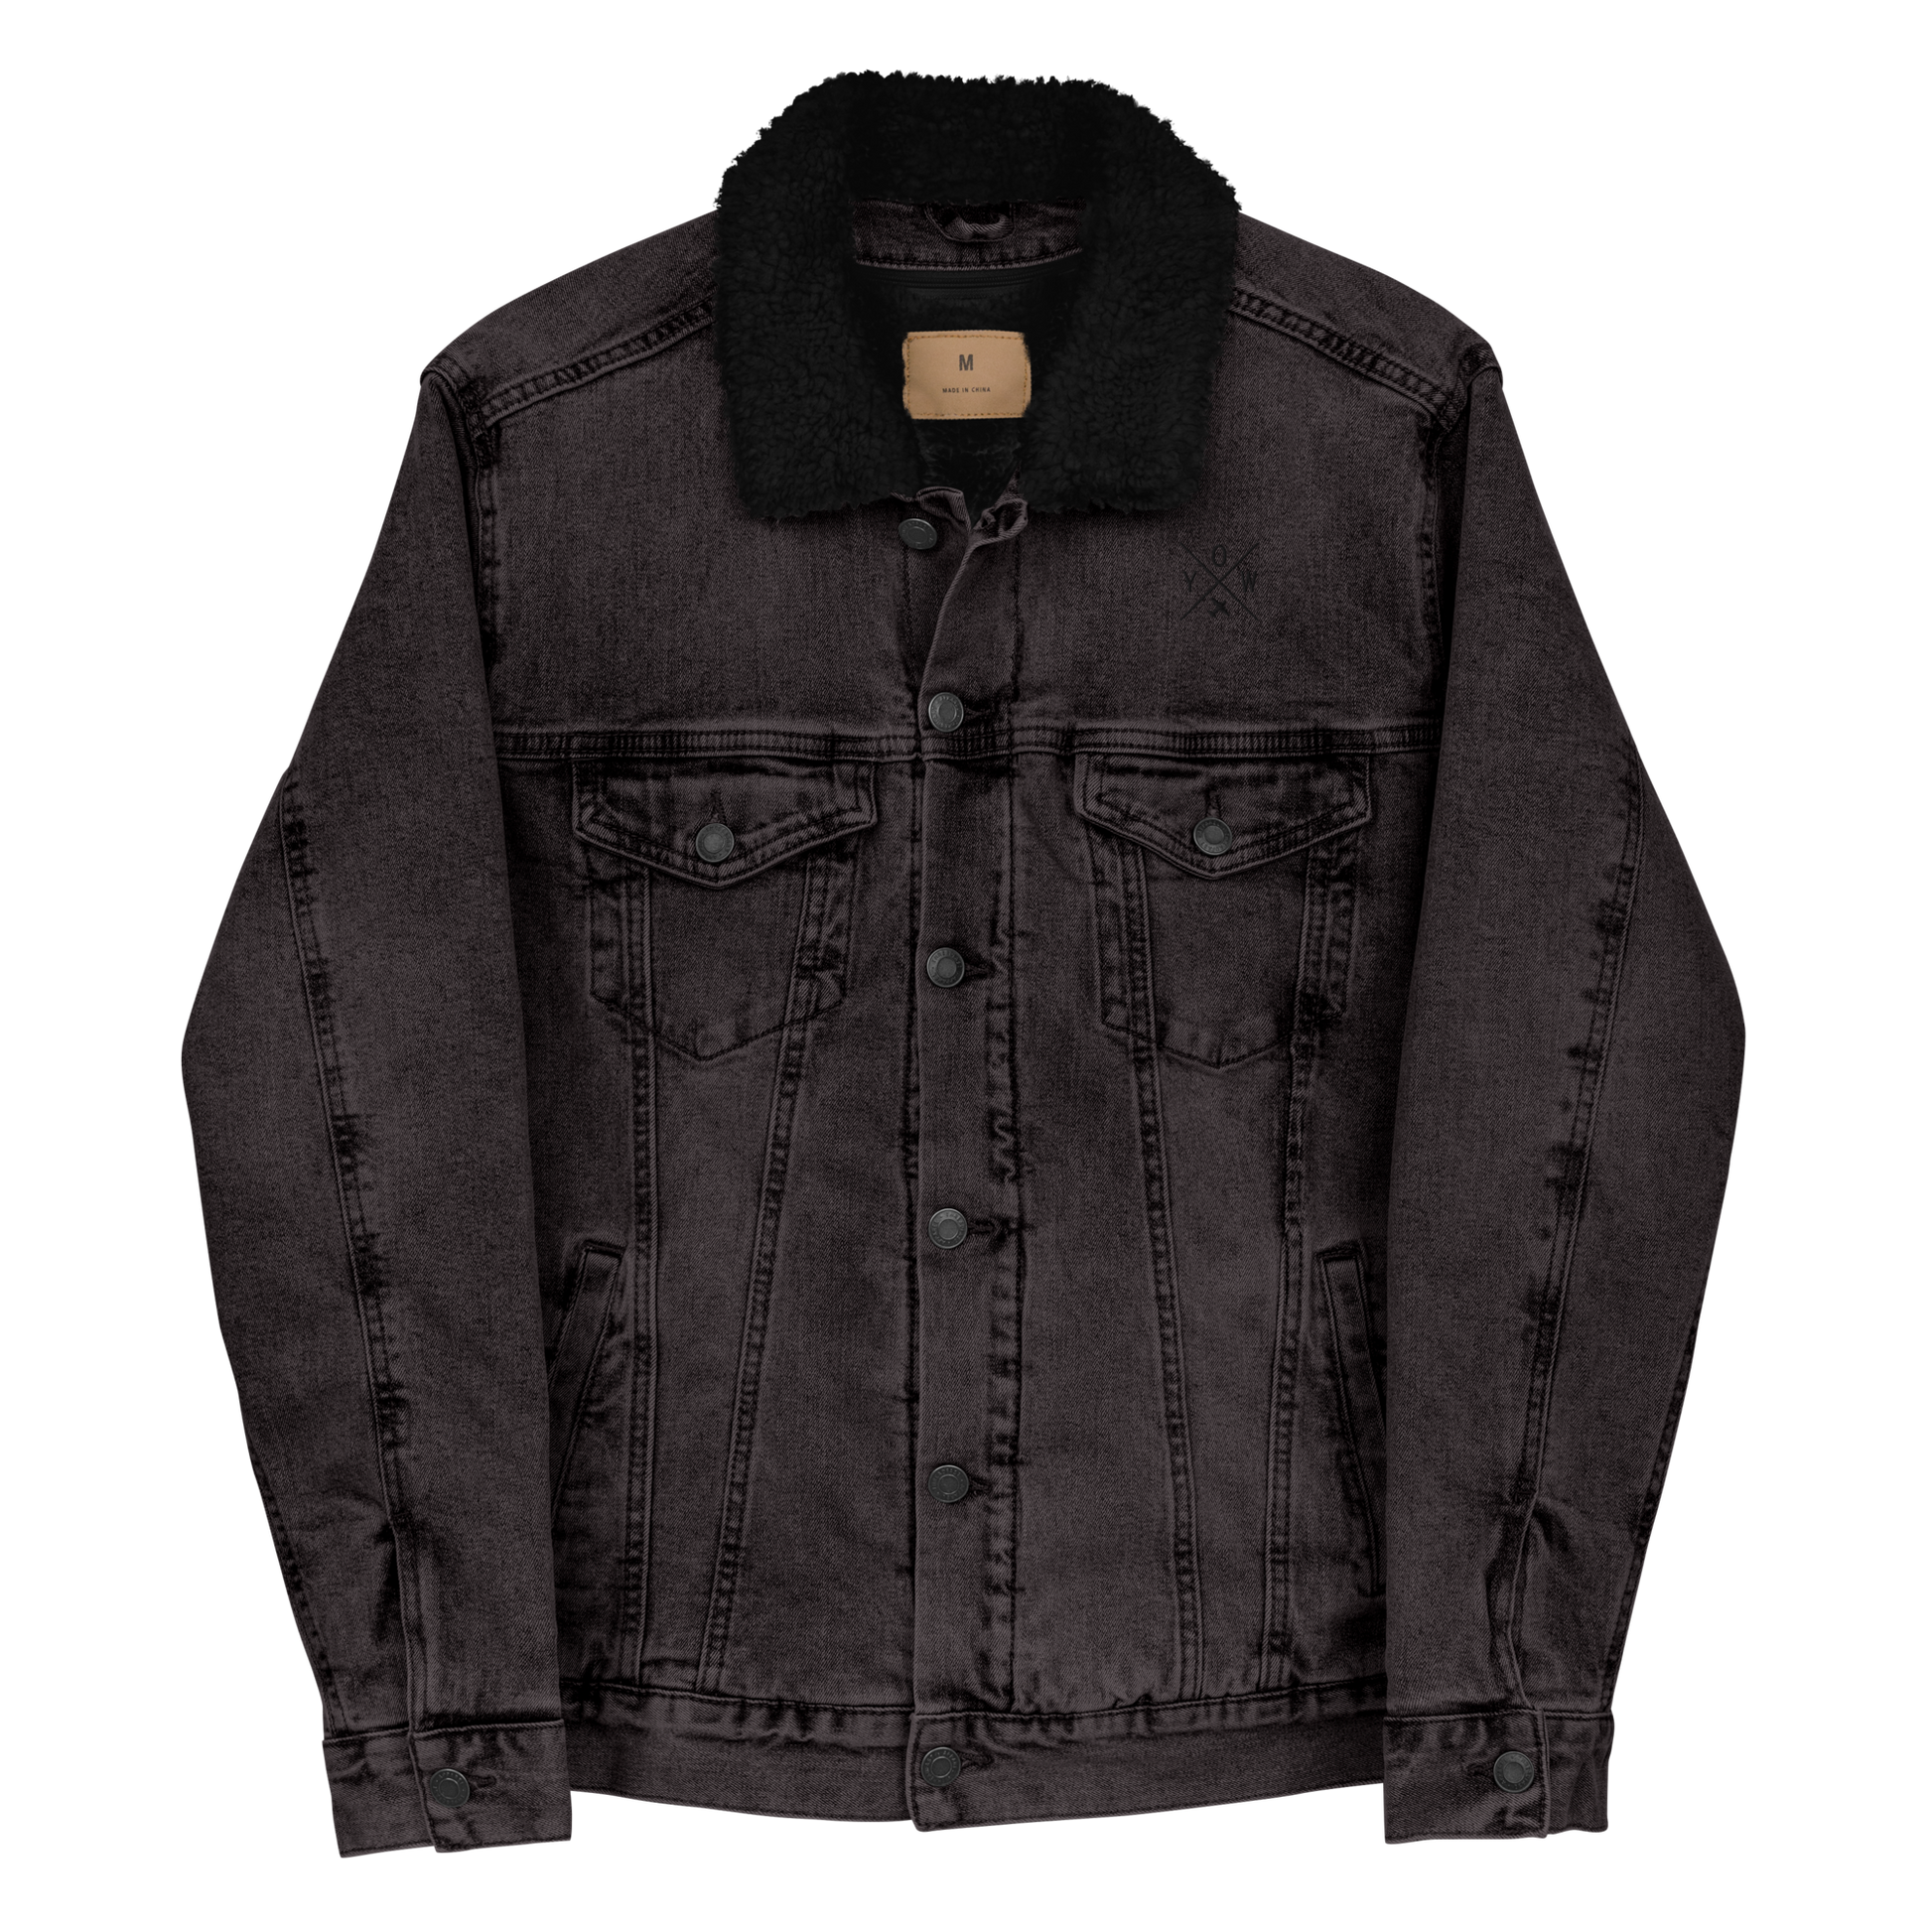 YHM Designs - YOW Ottawa Denim Sherpa Jacket - Crossed-X Design with Airport Code and Vintage Propliner - Black & White Embroidery - Image 06